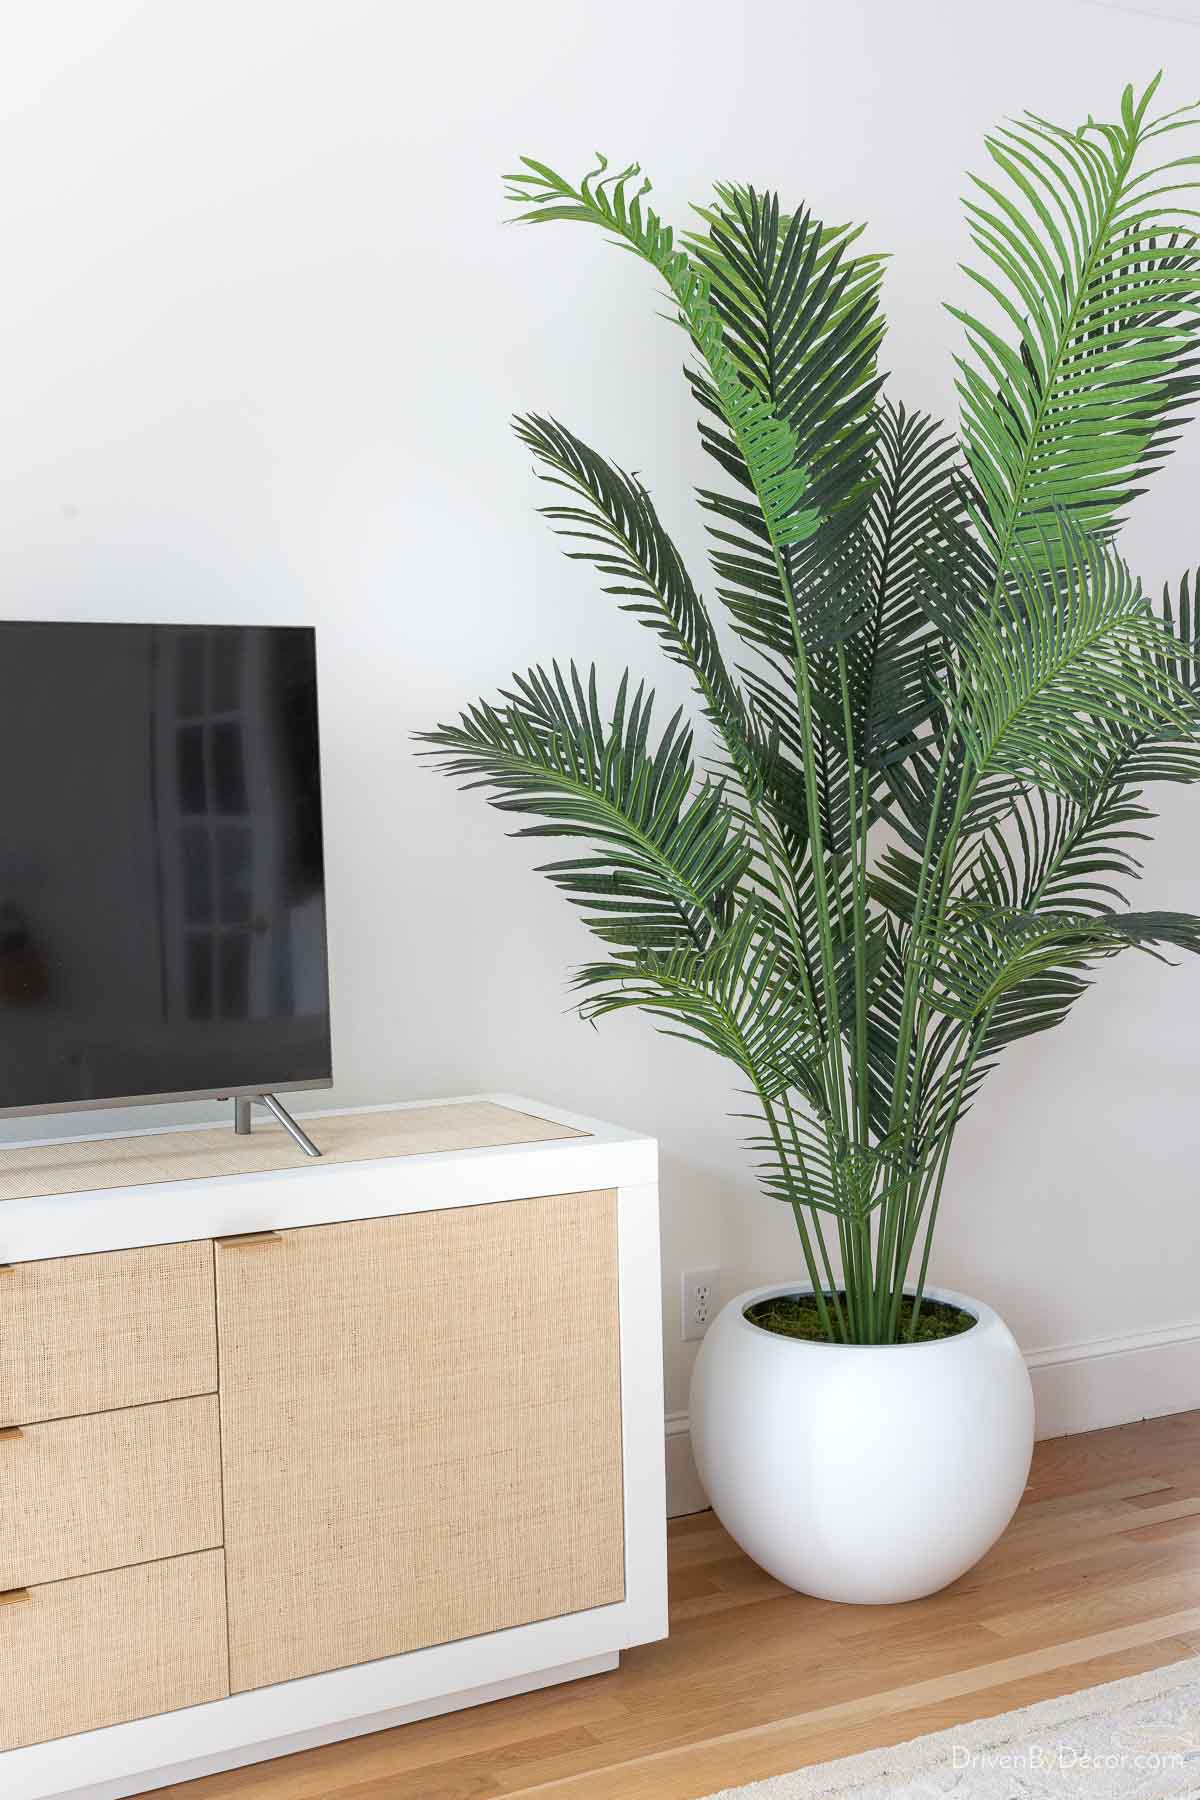 Large round white planter with faux palm tree next to TV console